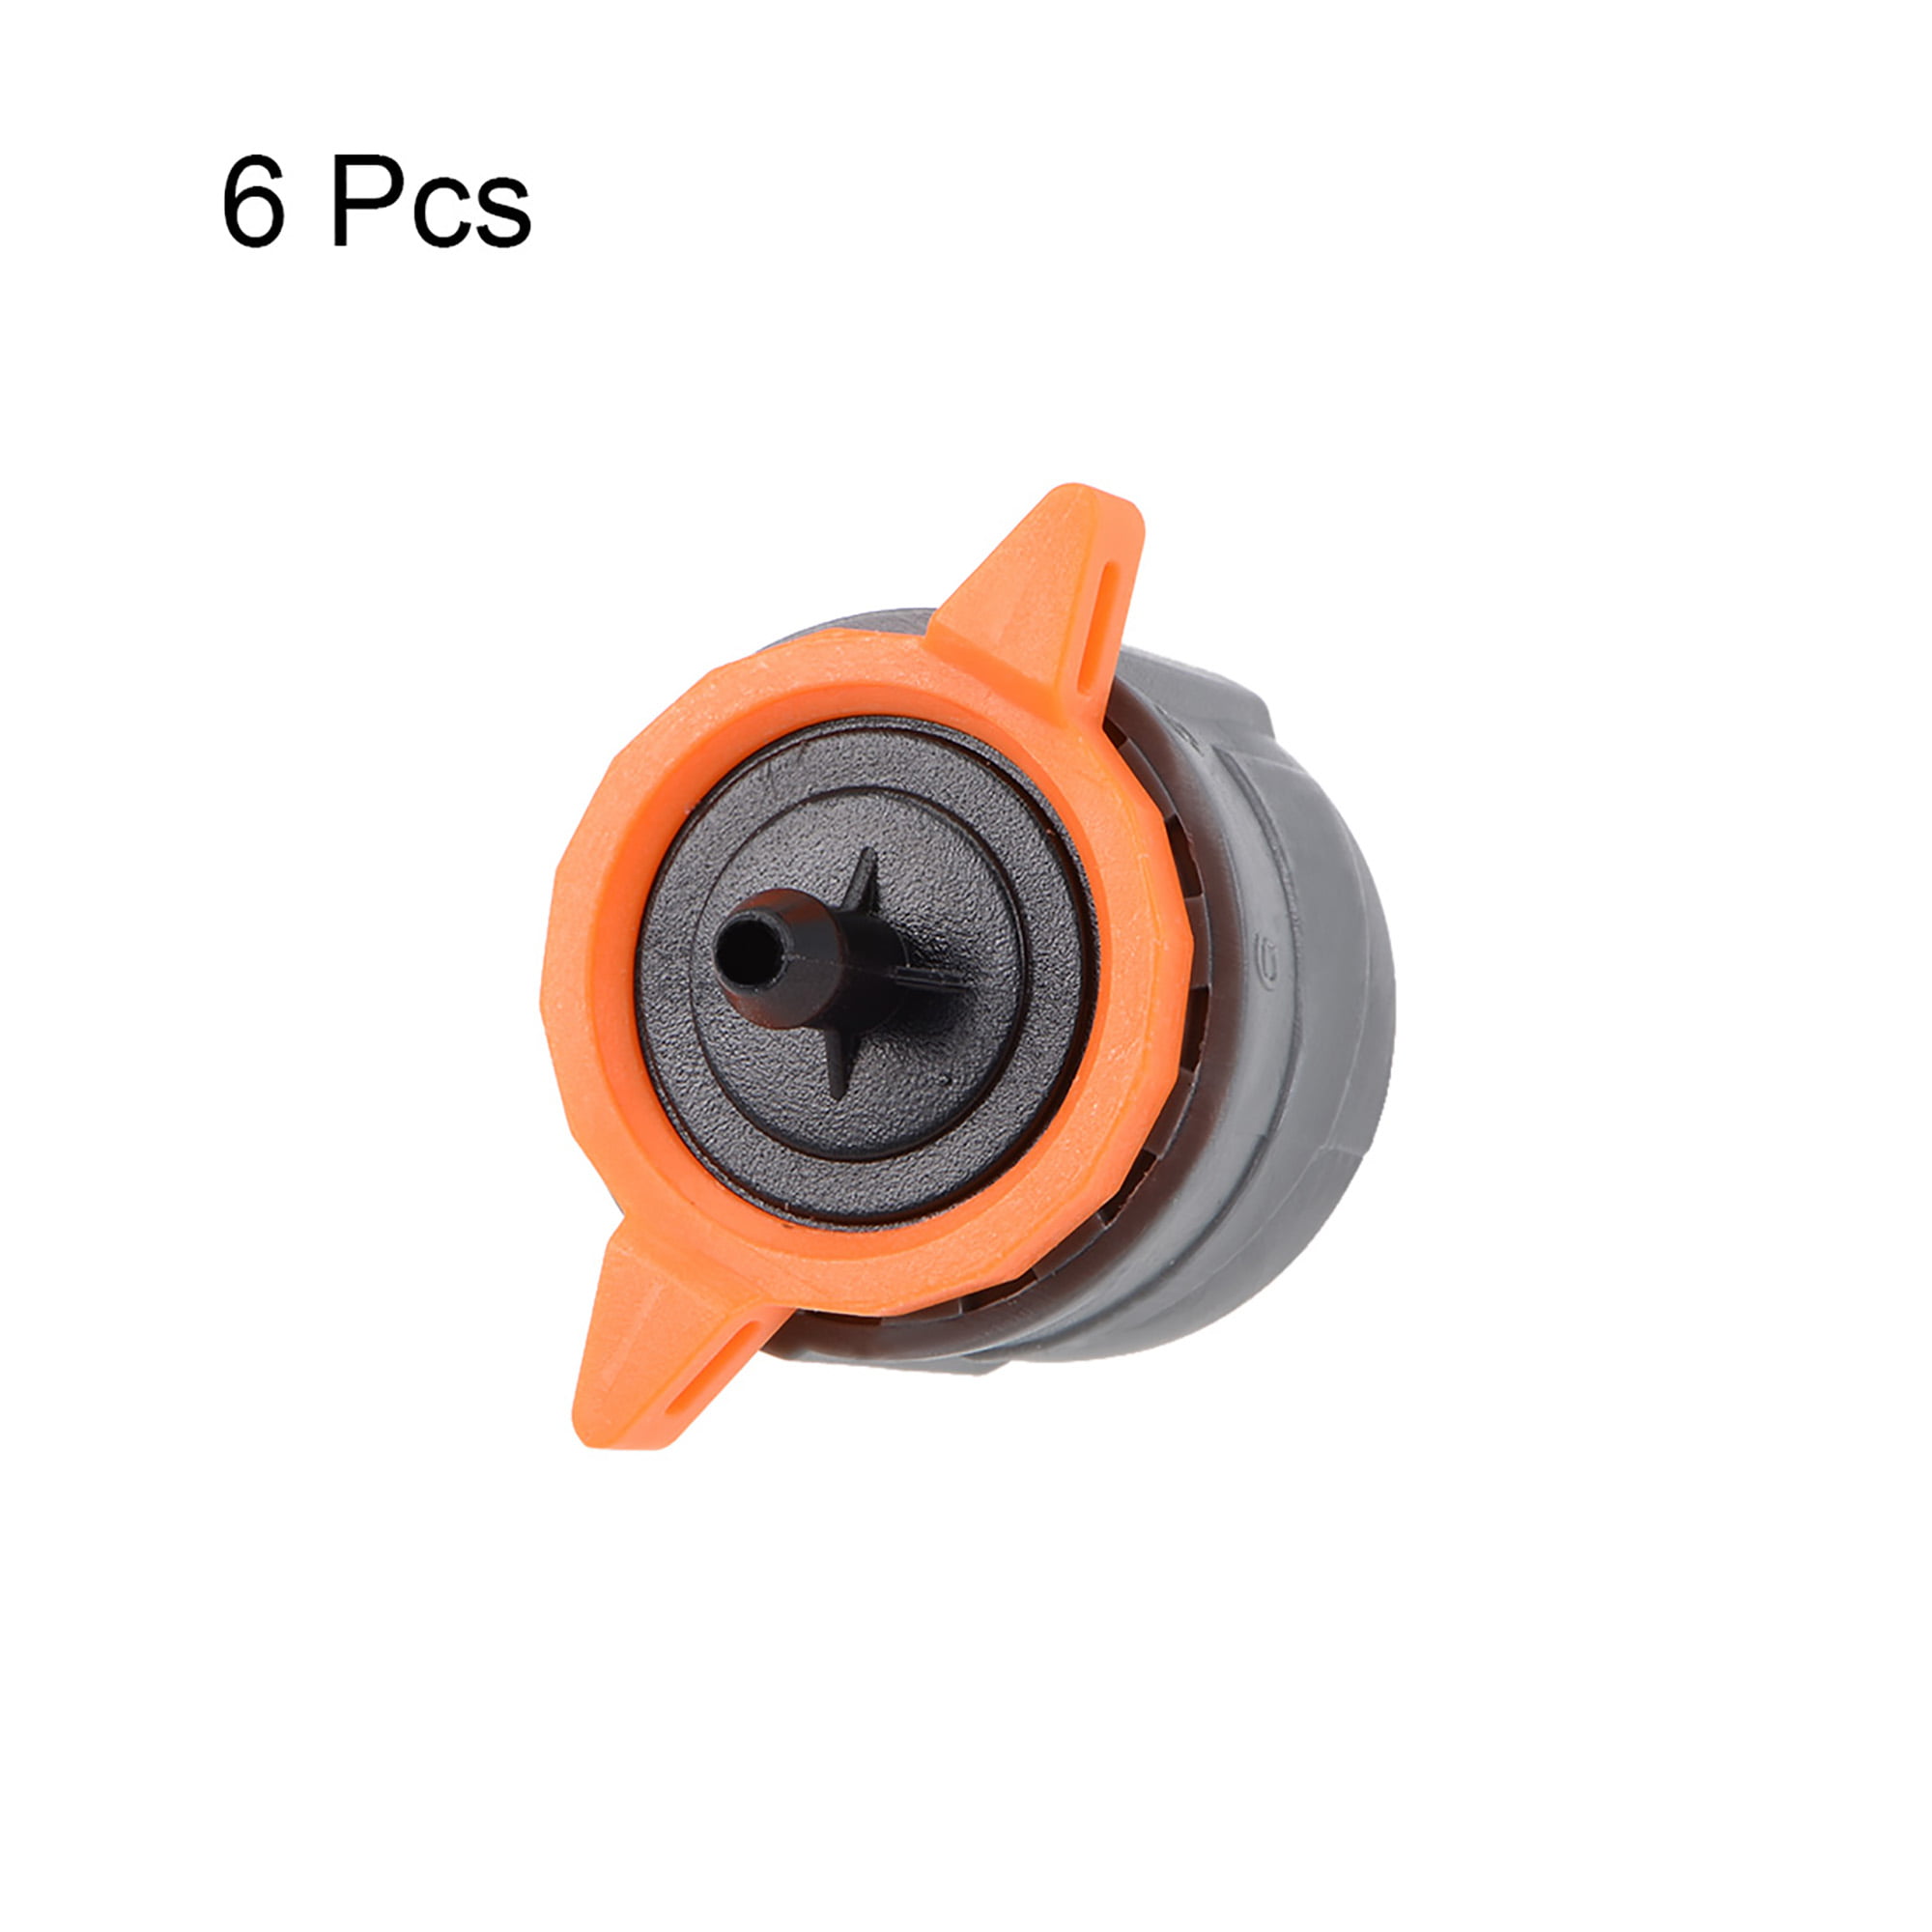 uxcell Pressure Compensating Dripper 0.5-2.6GPH 2-10L/H Adjustable Emitter for Garden Lawn Drip Irrigation with Hose Connector 10pcs